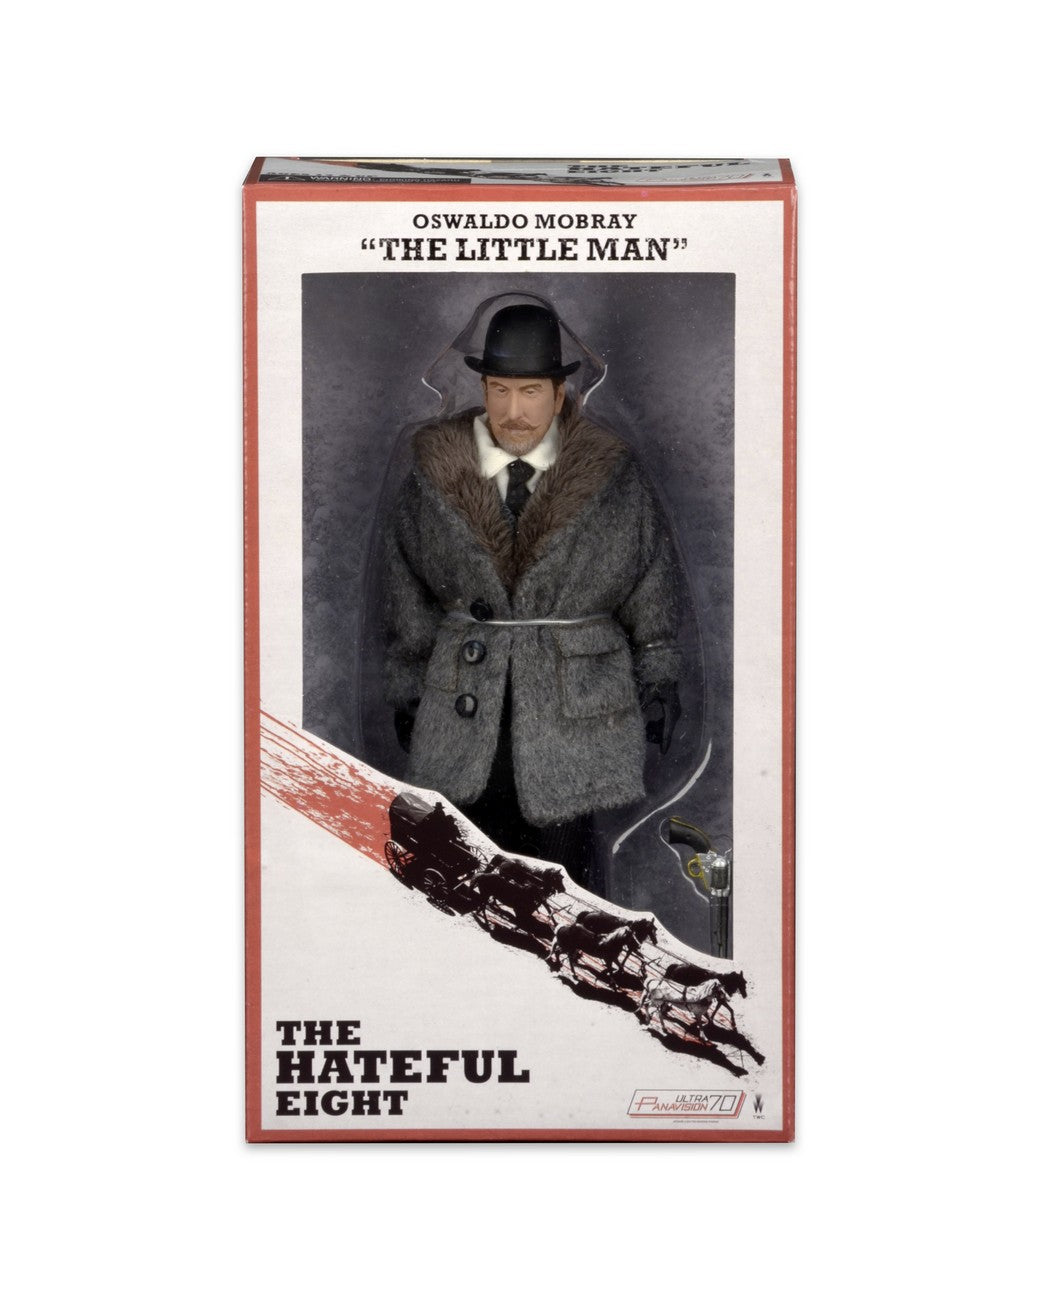 The Hateful Eight Oswaldo Mobray "The Little Man" Clothed Figure